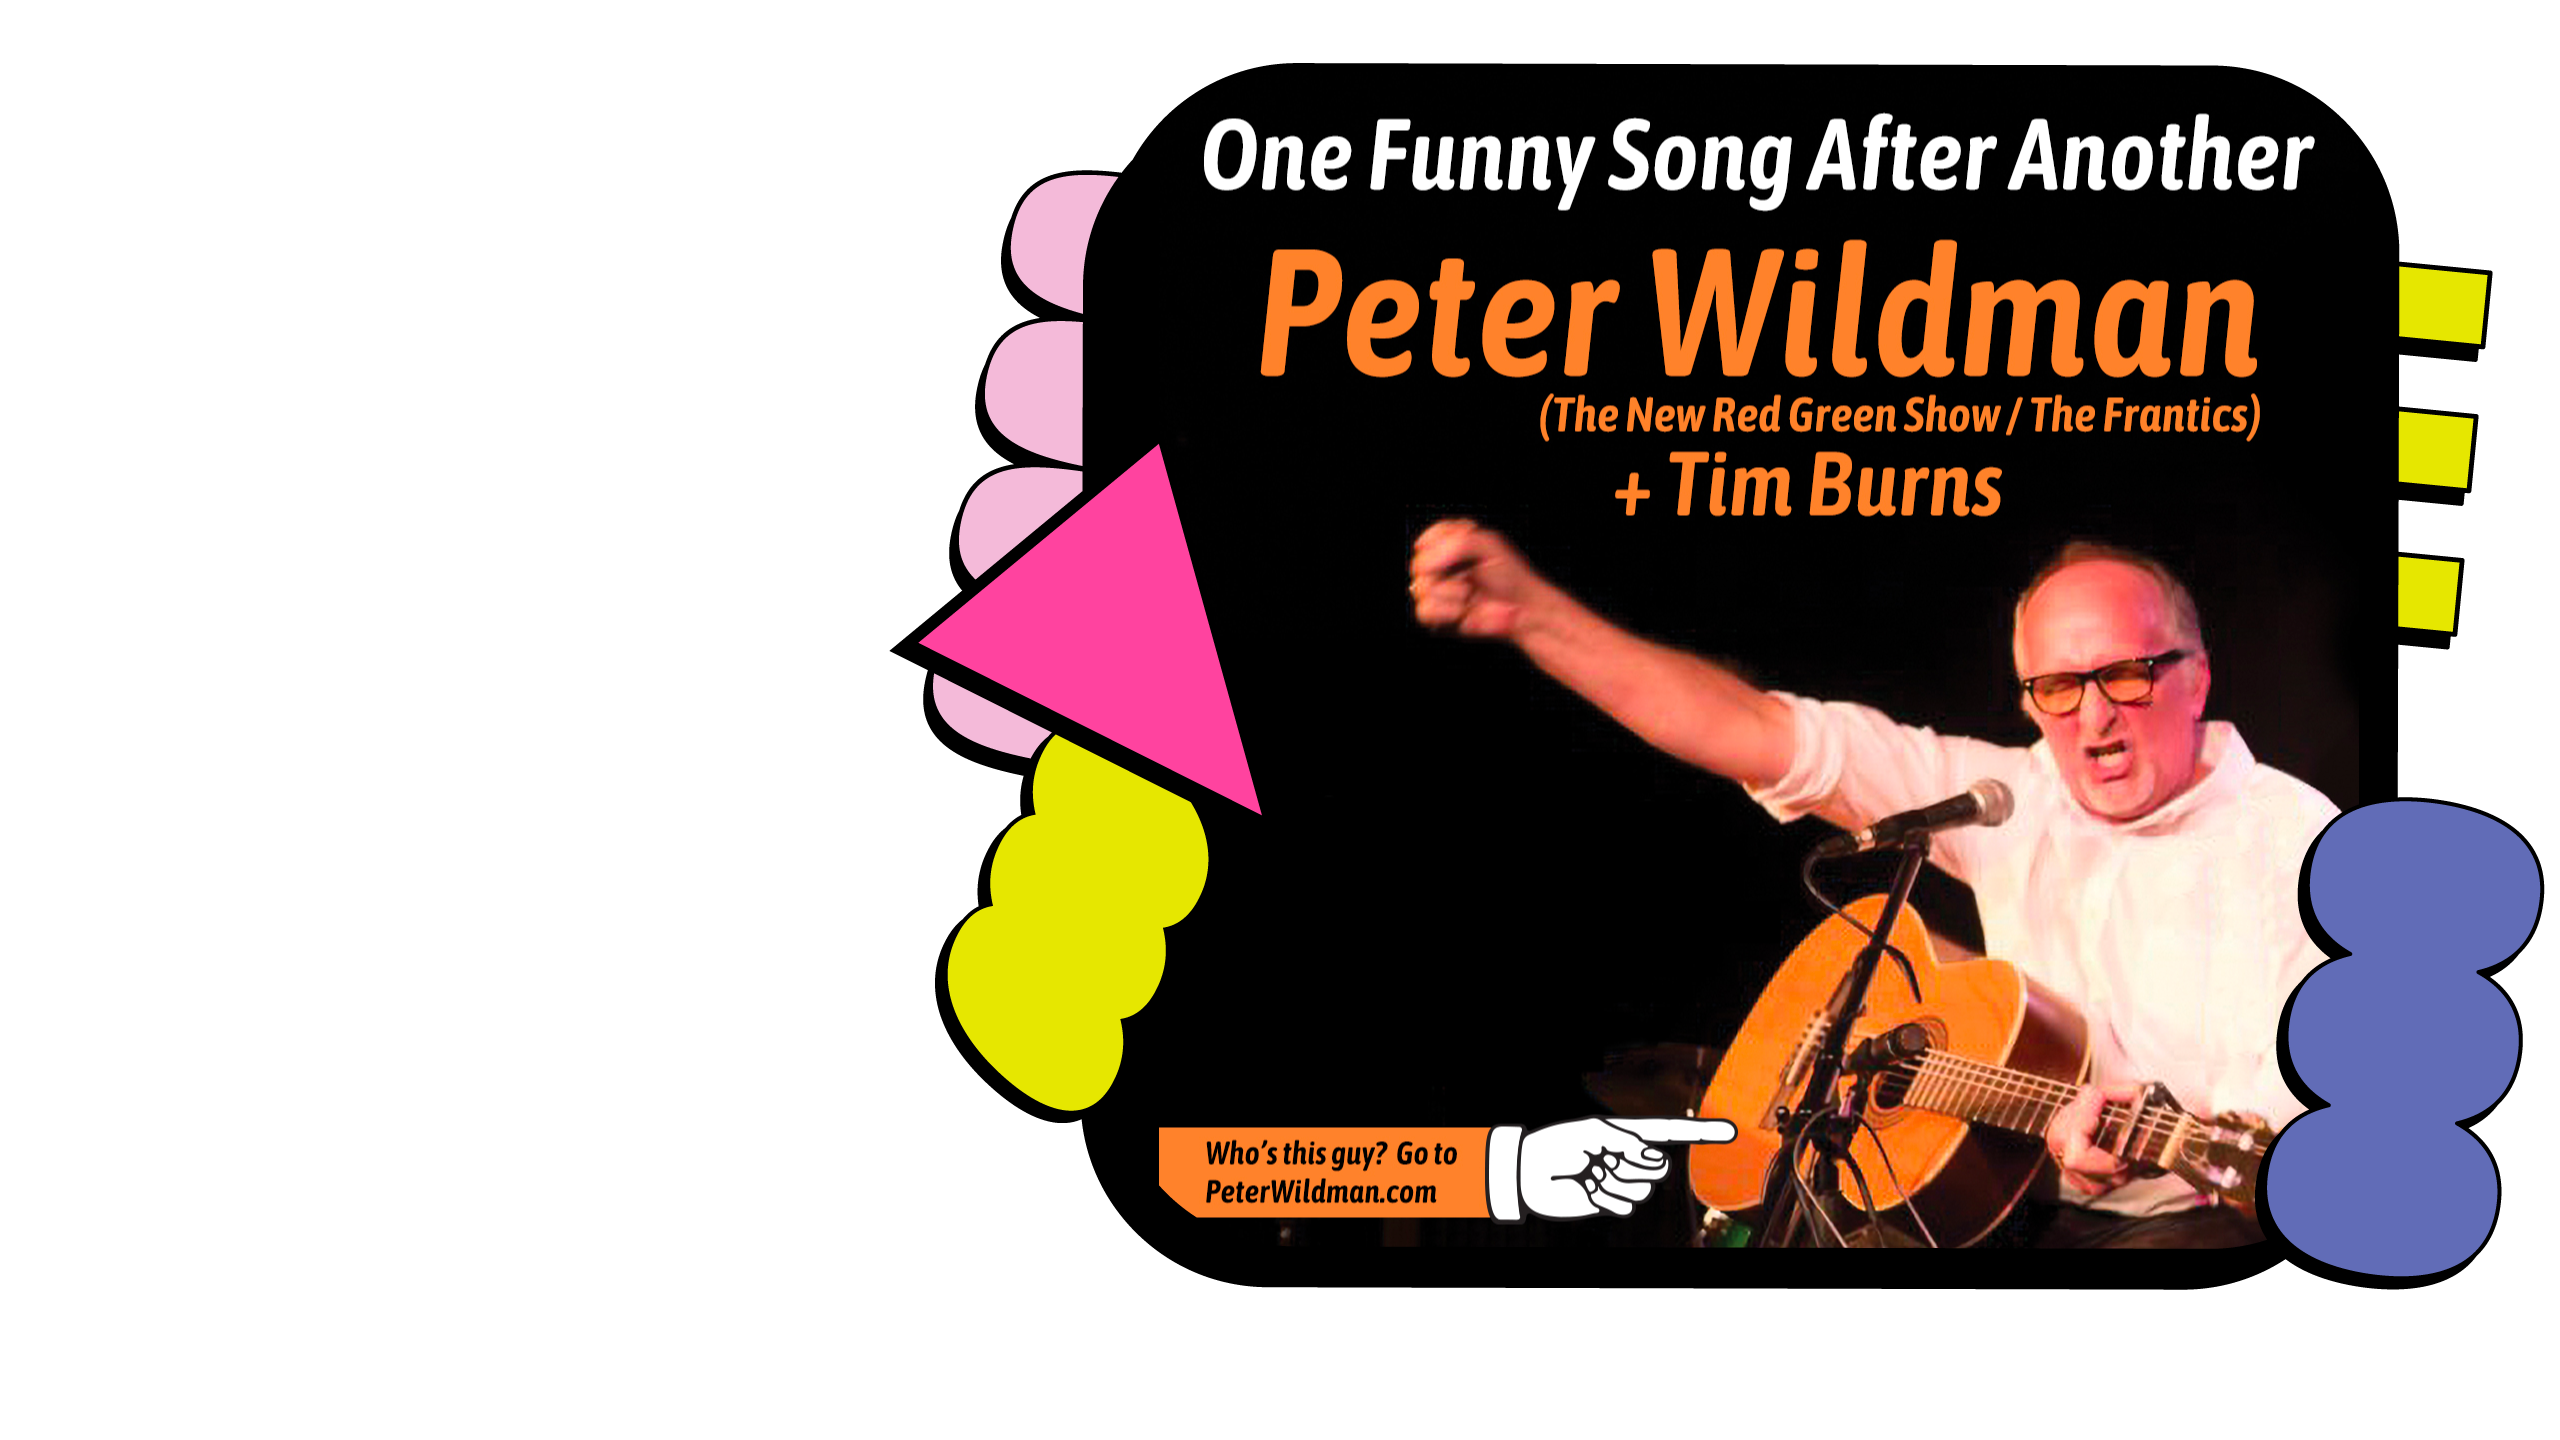 Promotional image for Peter Wildman: One Funny Song After Another